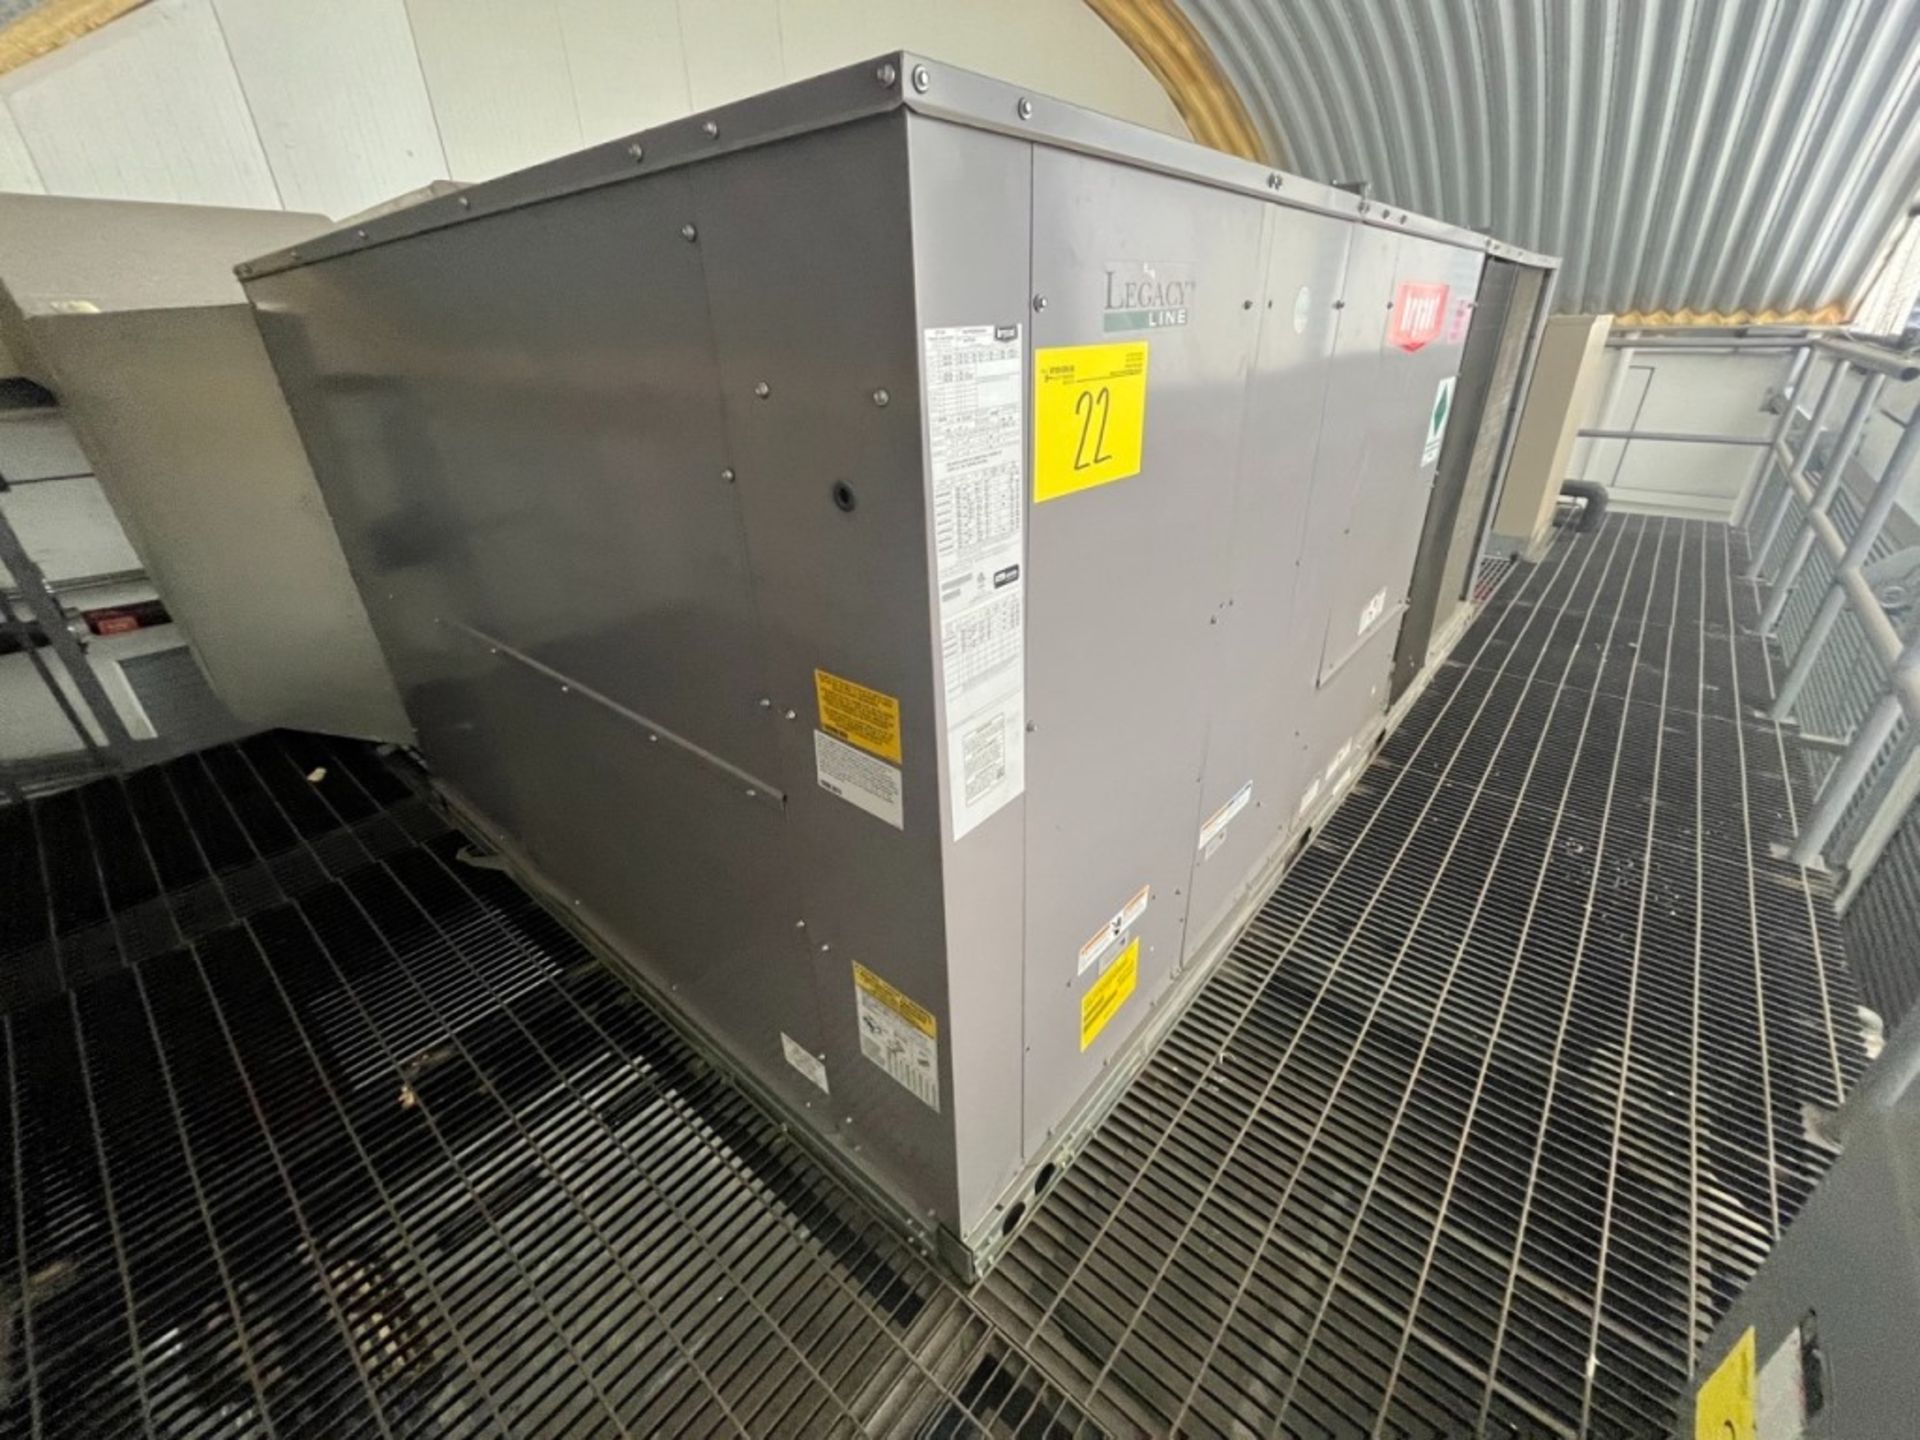 (NEW) Bryant Unit Package Air Model 558JP25D000A5A0AAAAA, Serial No. 4021P18147; Includes ductwork - Image 5 of 26